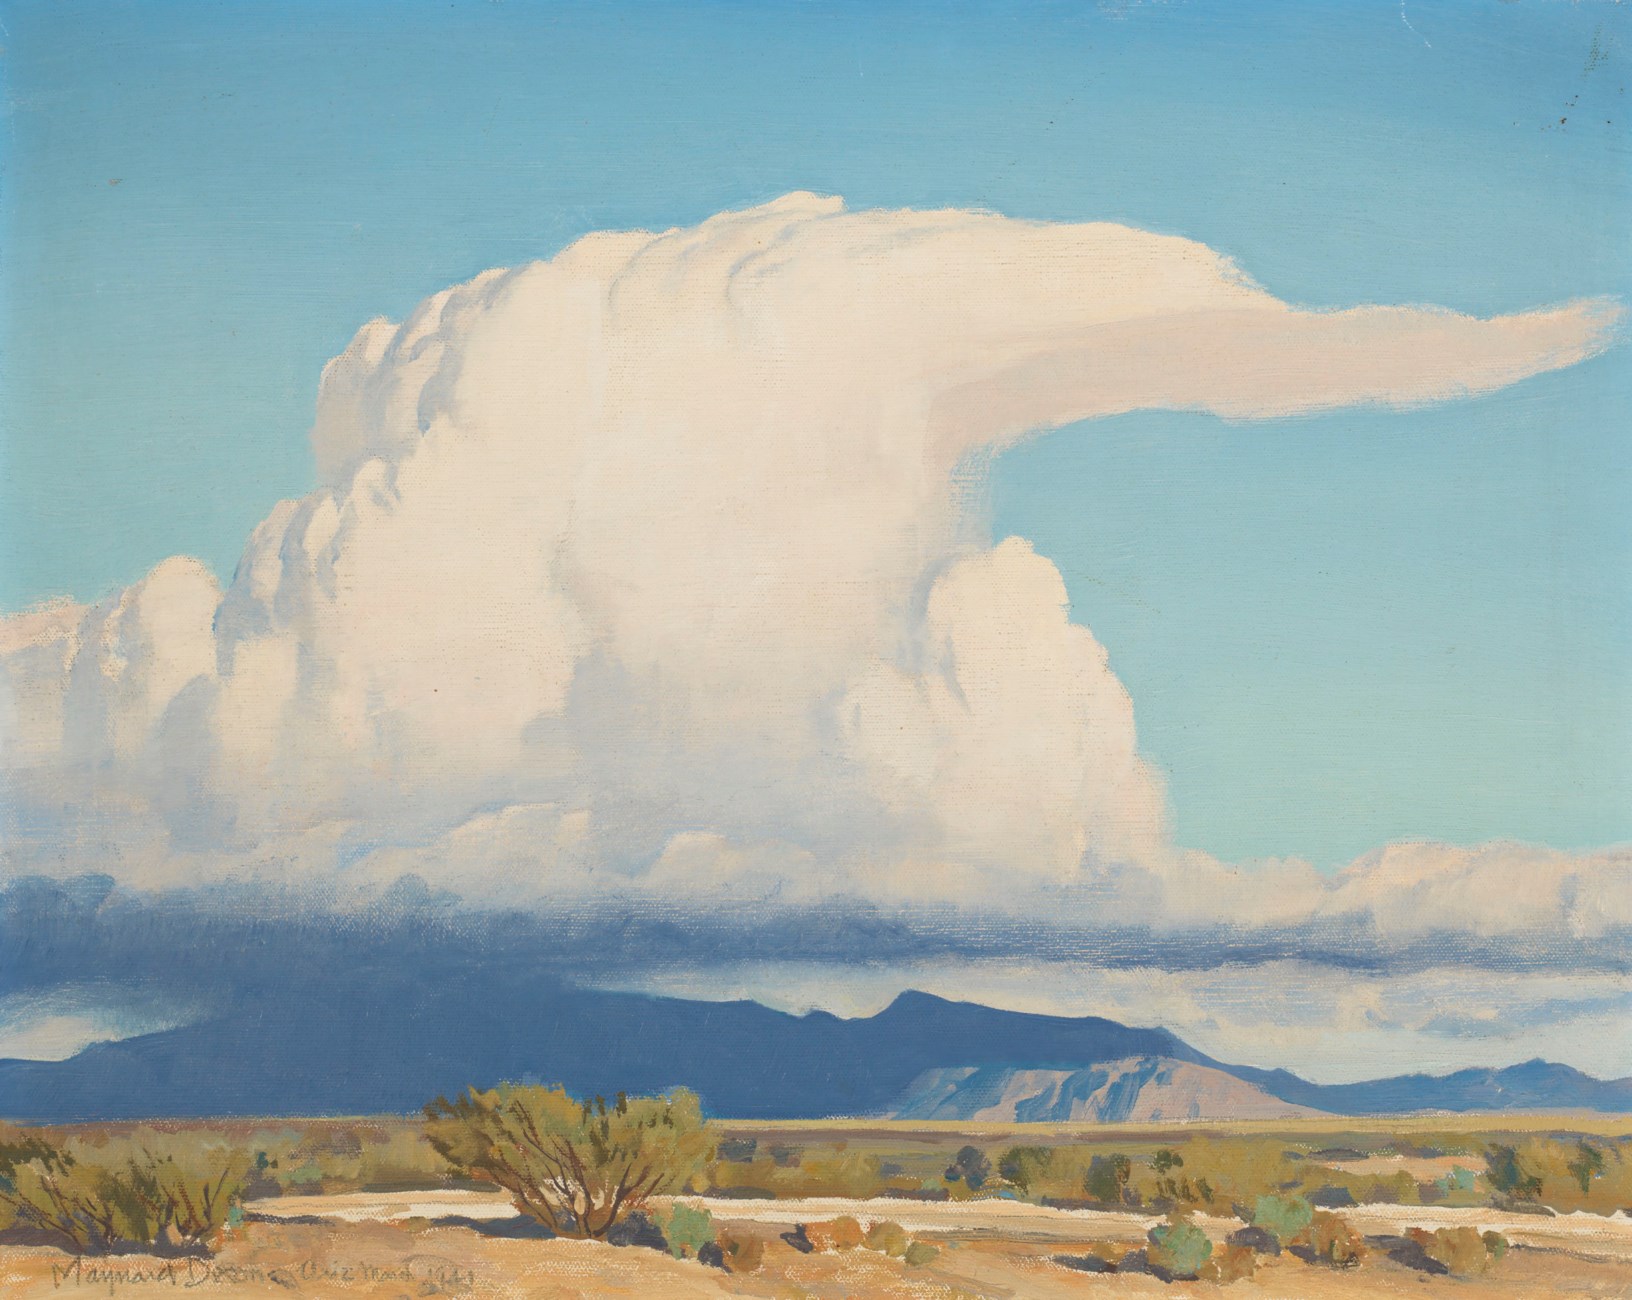 Cloud by Maynard Dixon - 1941 - 40.6 x 50.8 cm private collection